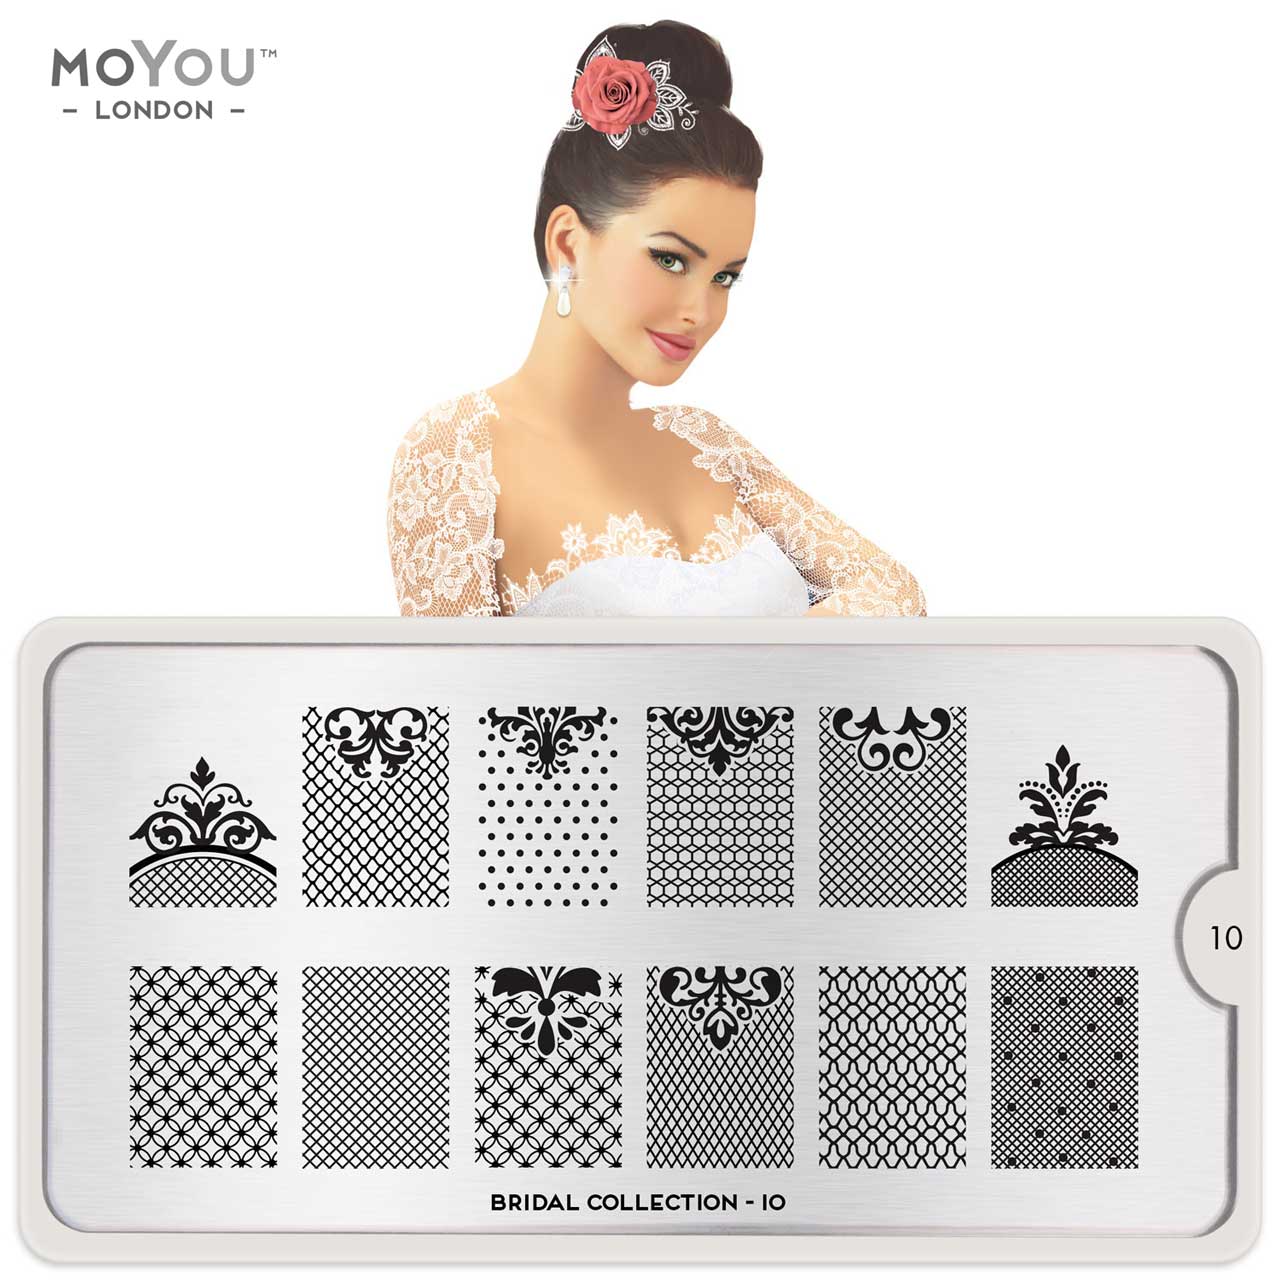 Plaque Stamping Bridal 10 - MoYou London